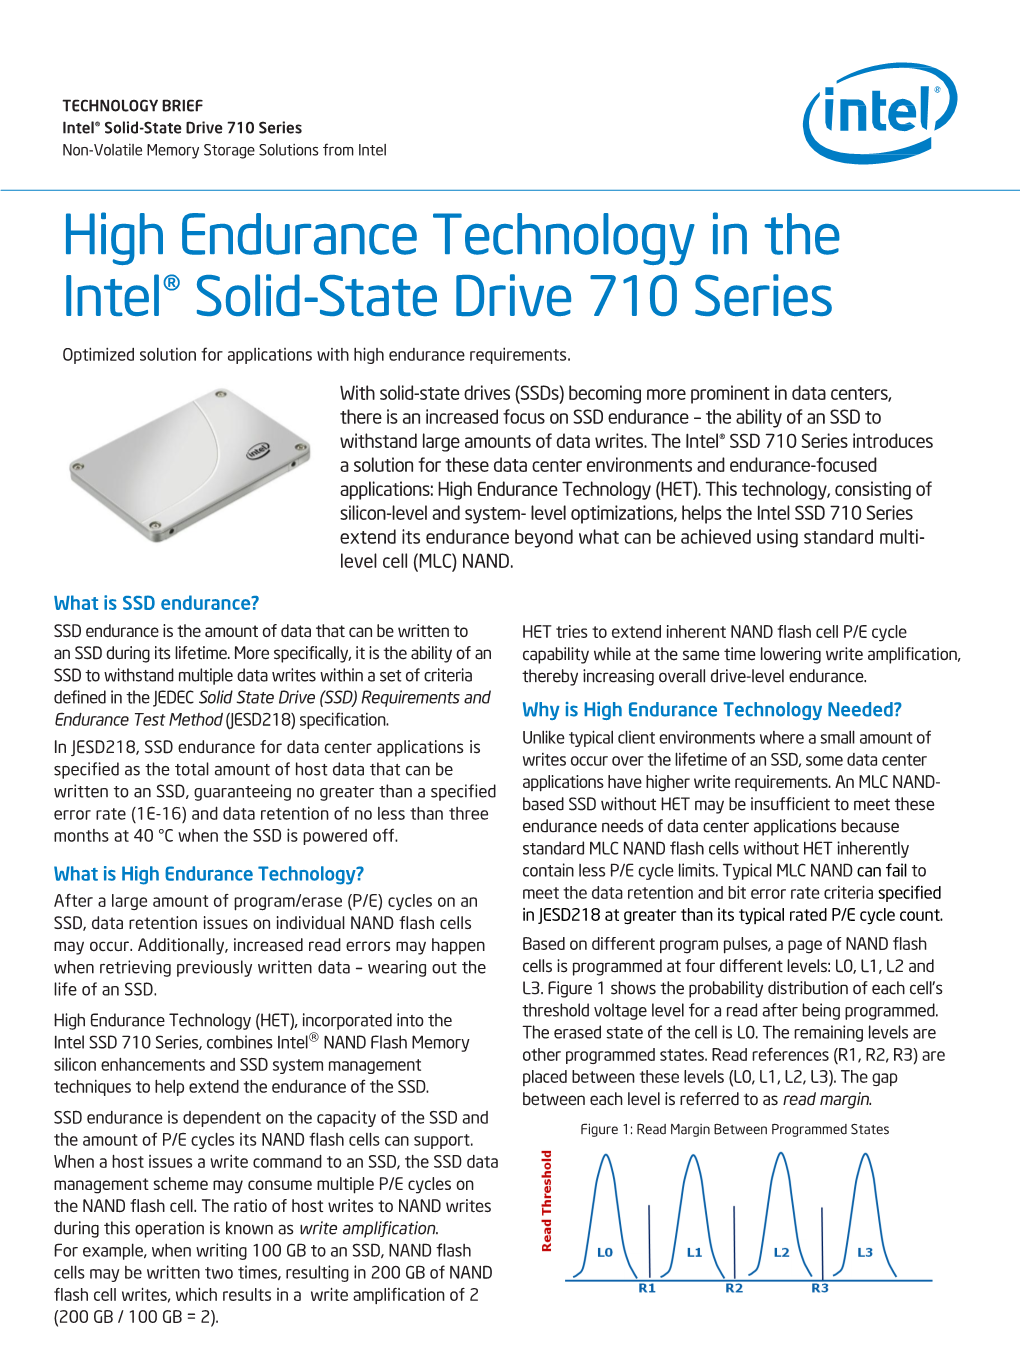 High Endurance Technology in the Intel Solid-State Drive 710 Series